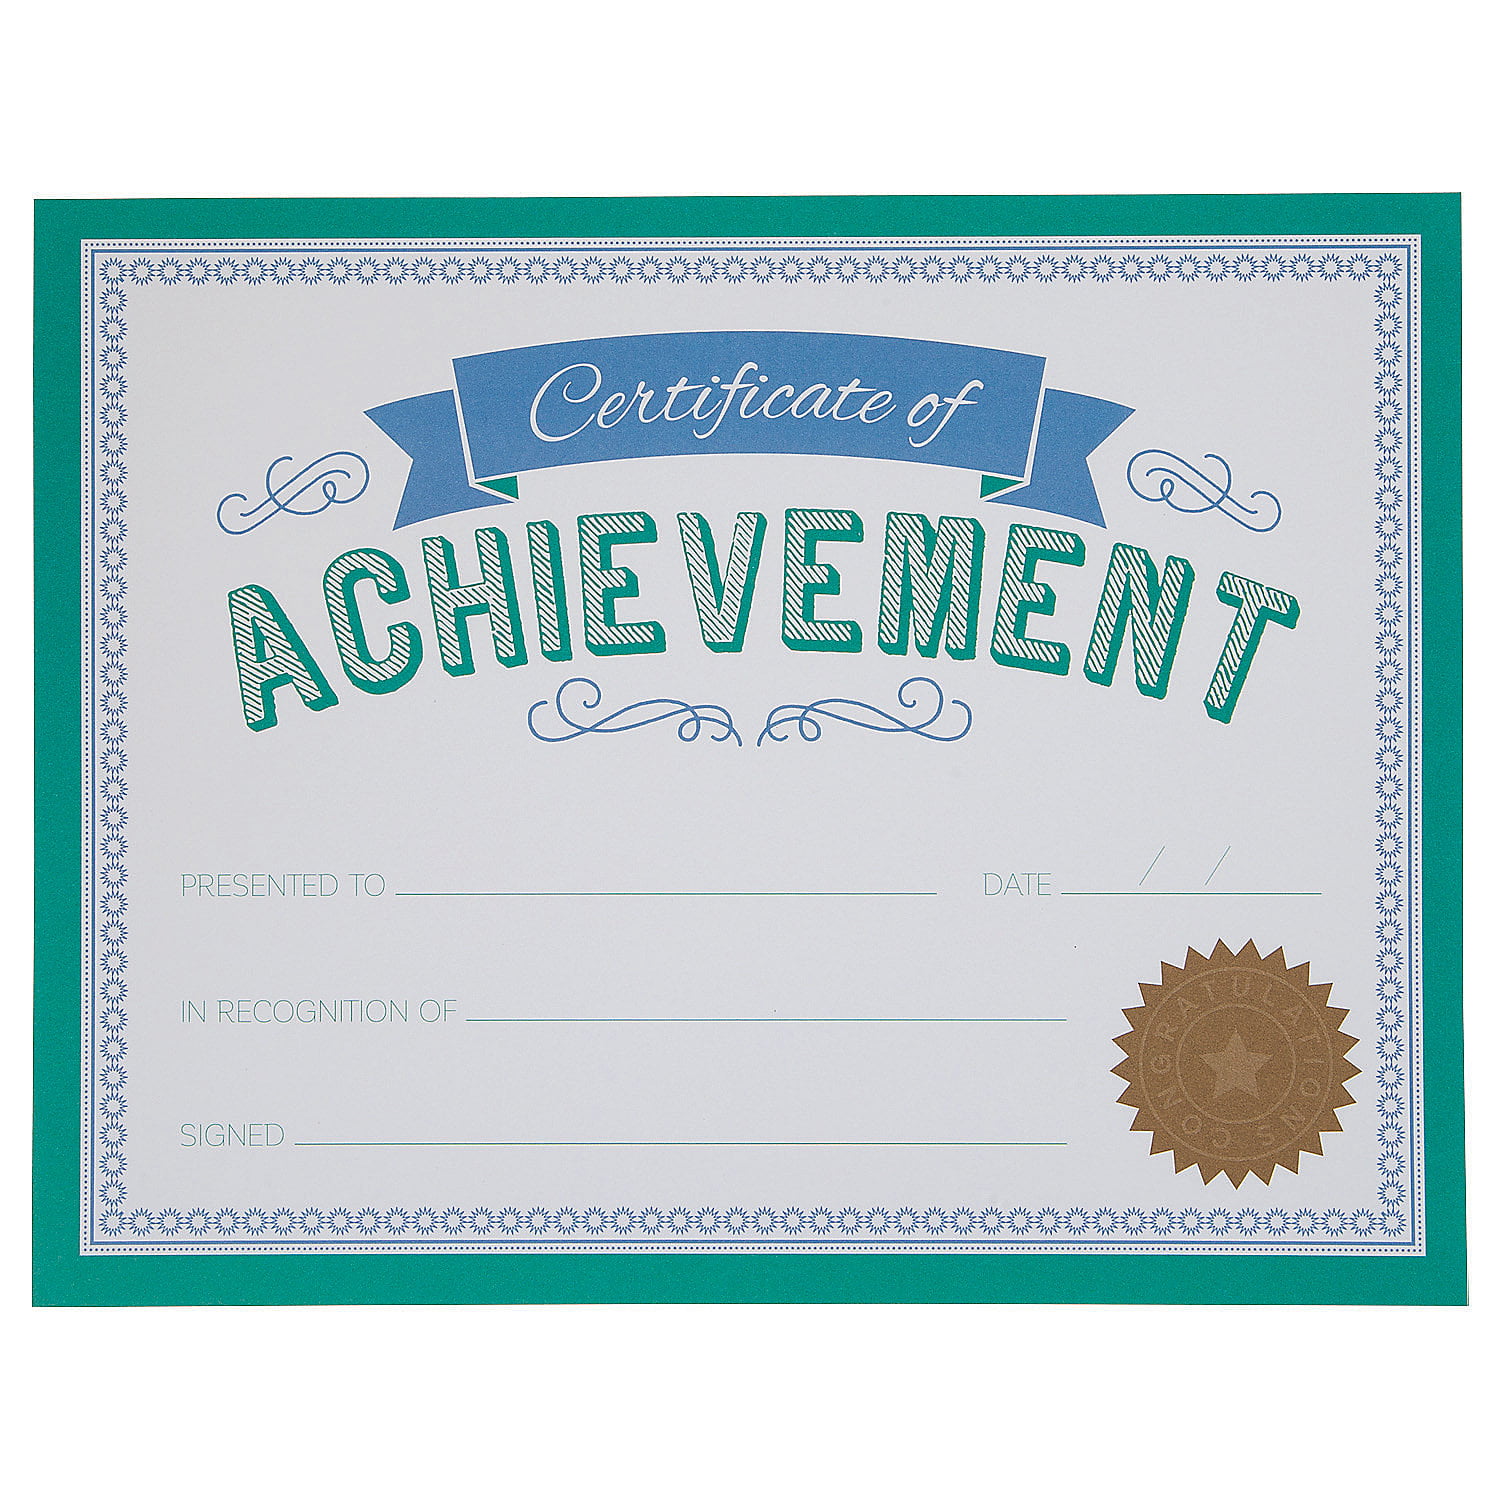 Y Student of the Week Award Certificates 15 Paper 8.5"x 11" Teachers' Supplies 